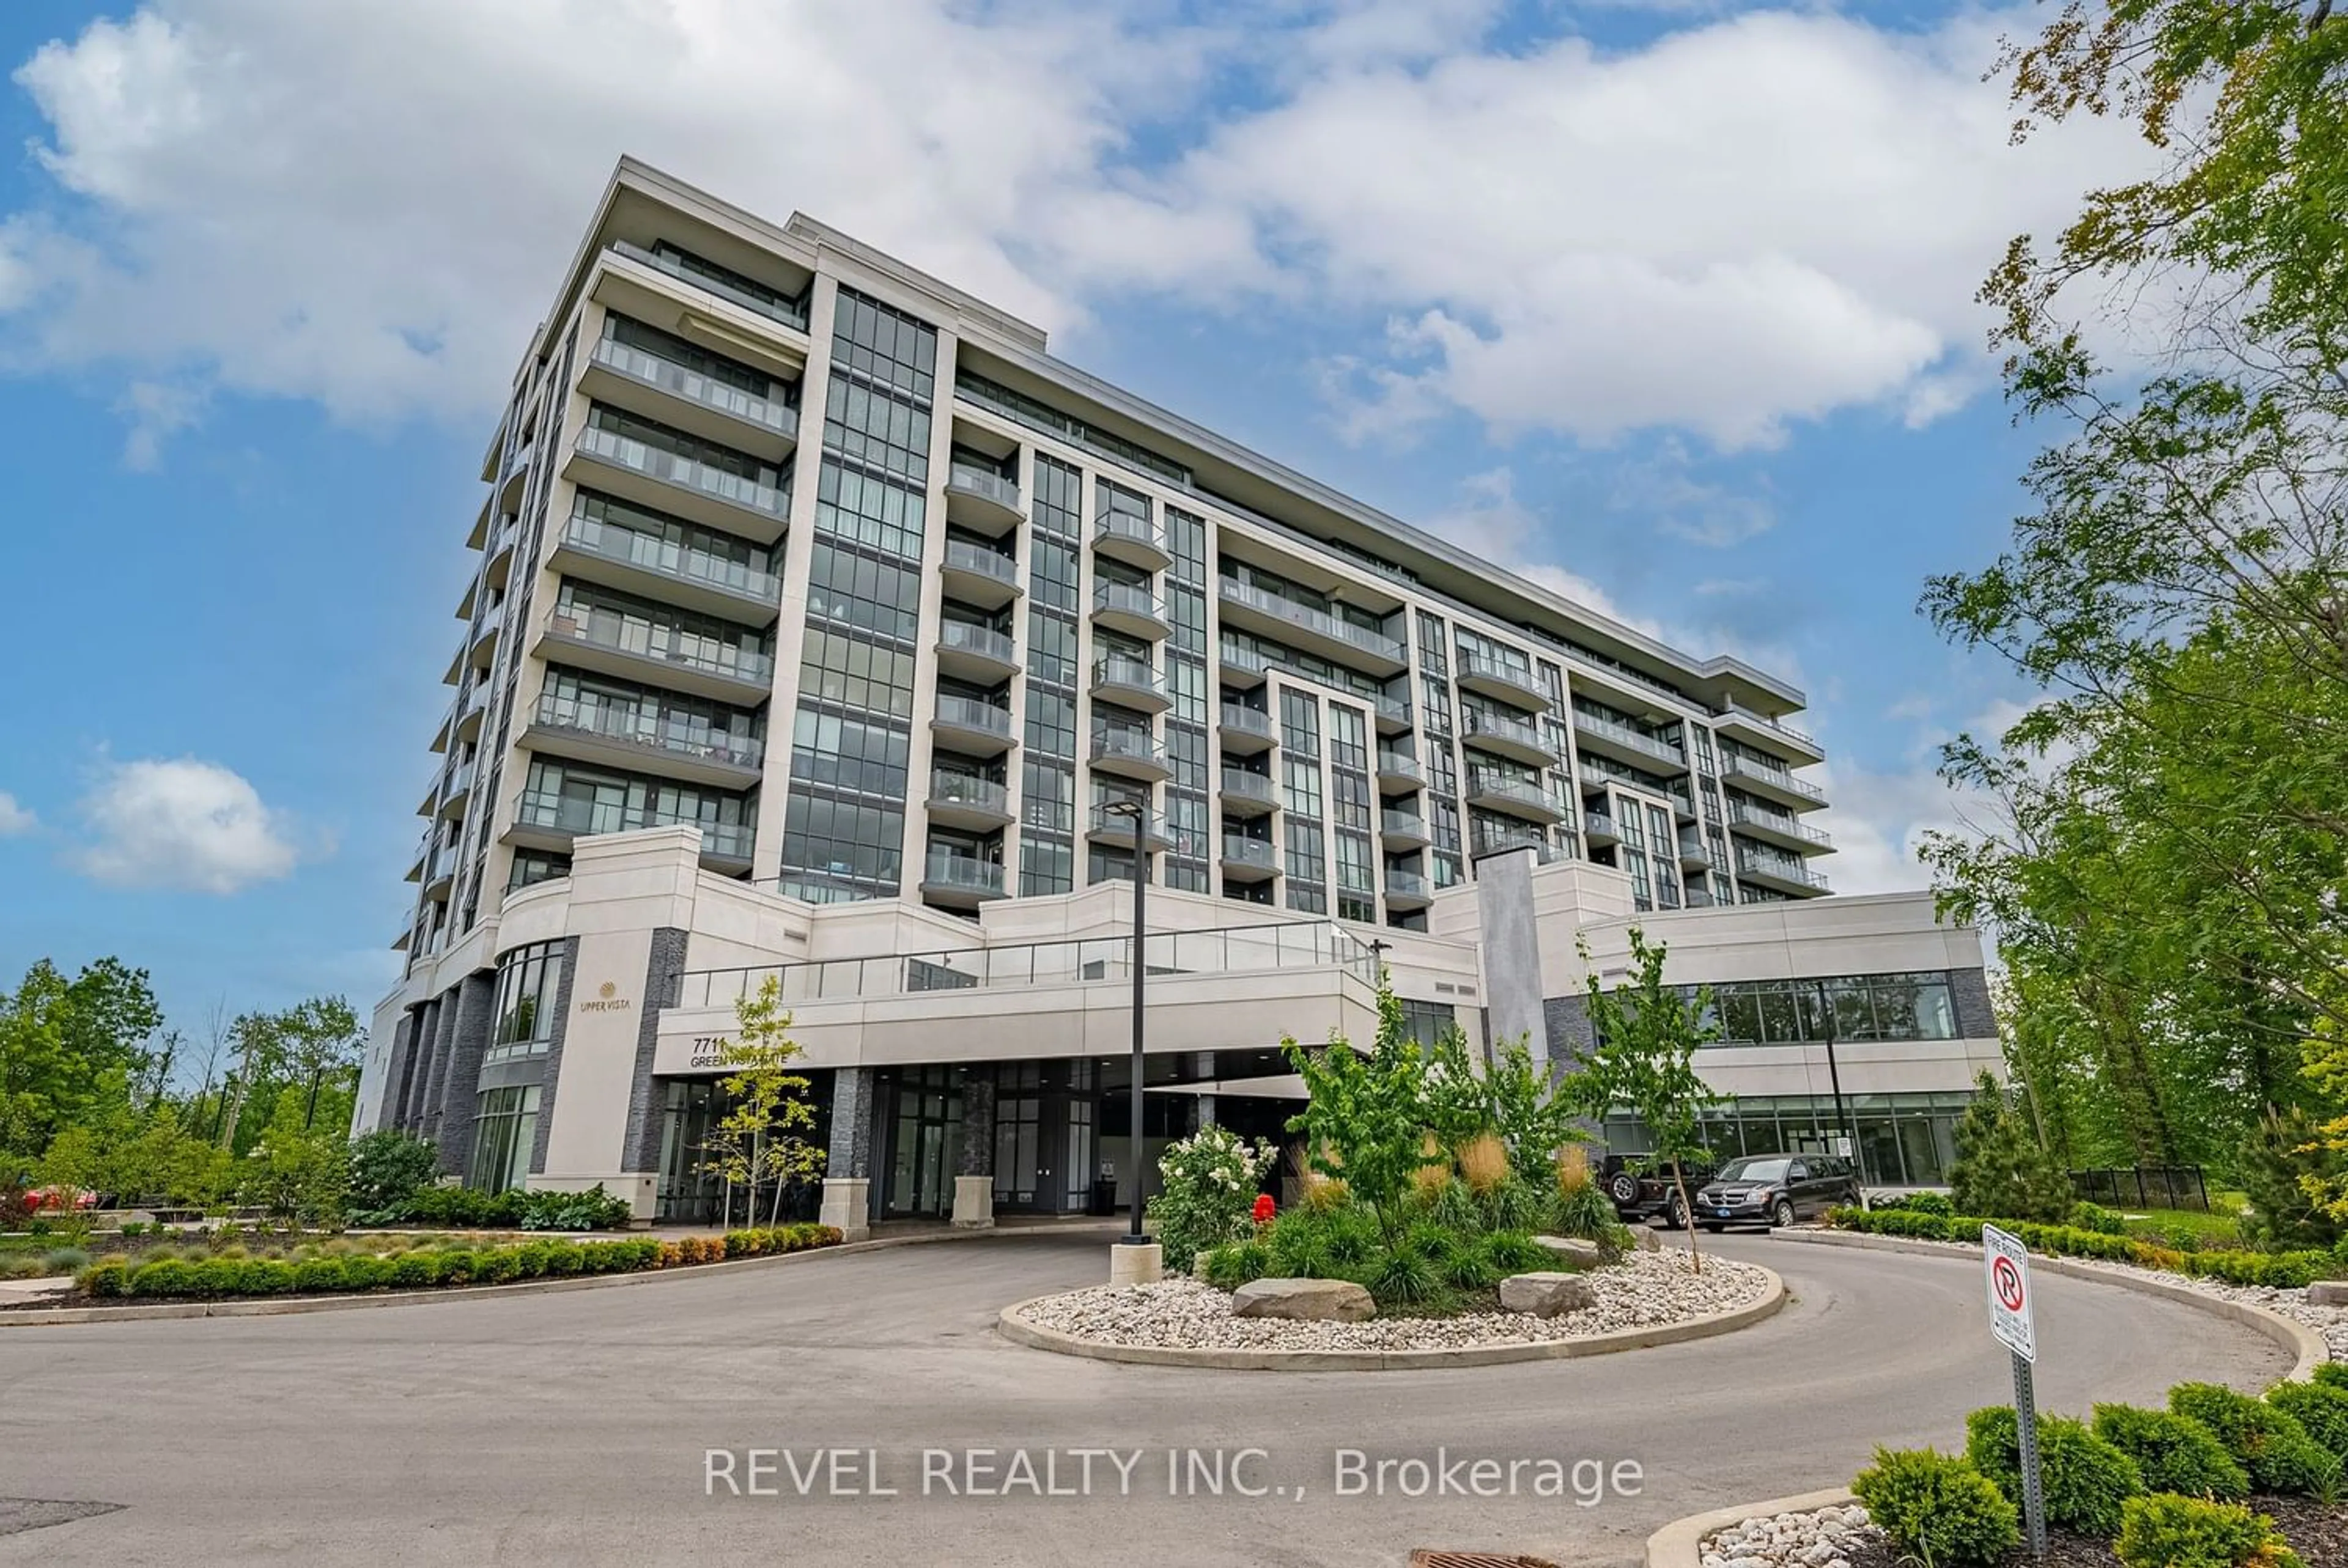 A pic from exterior of the house or condo for 7711 Green Ave #612, Niagara Falls Ontario L2H 1R1